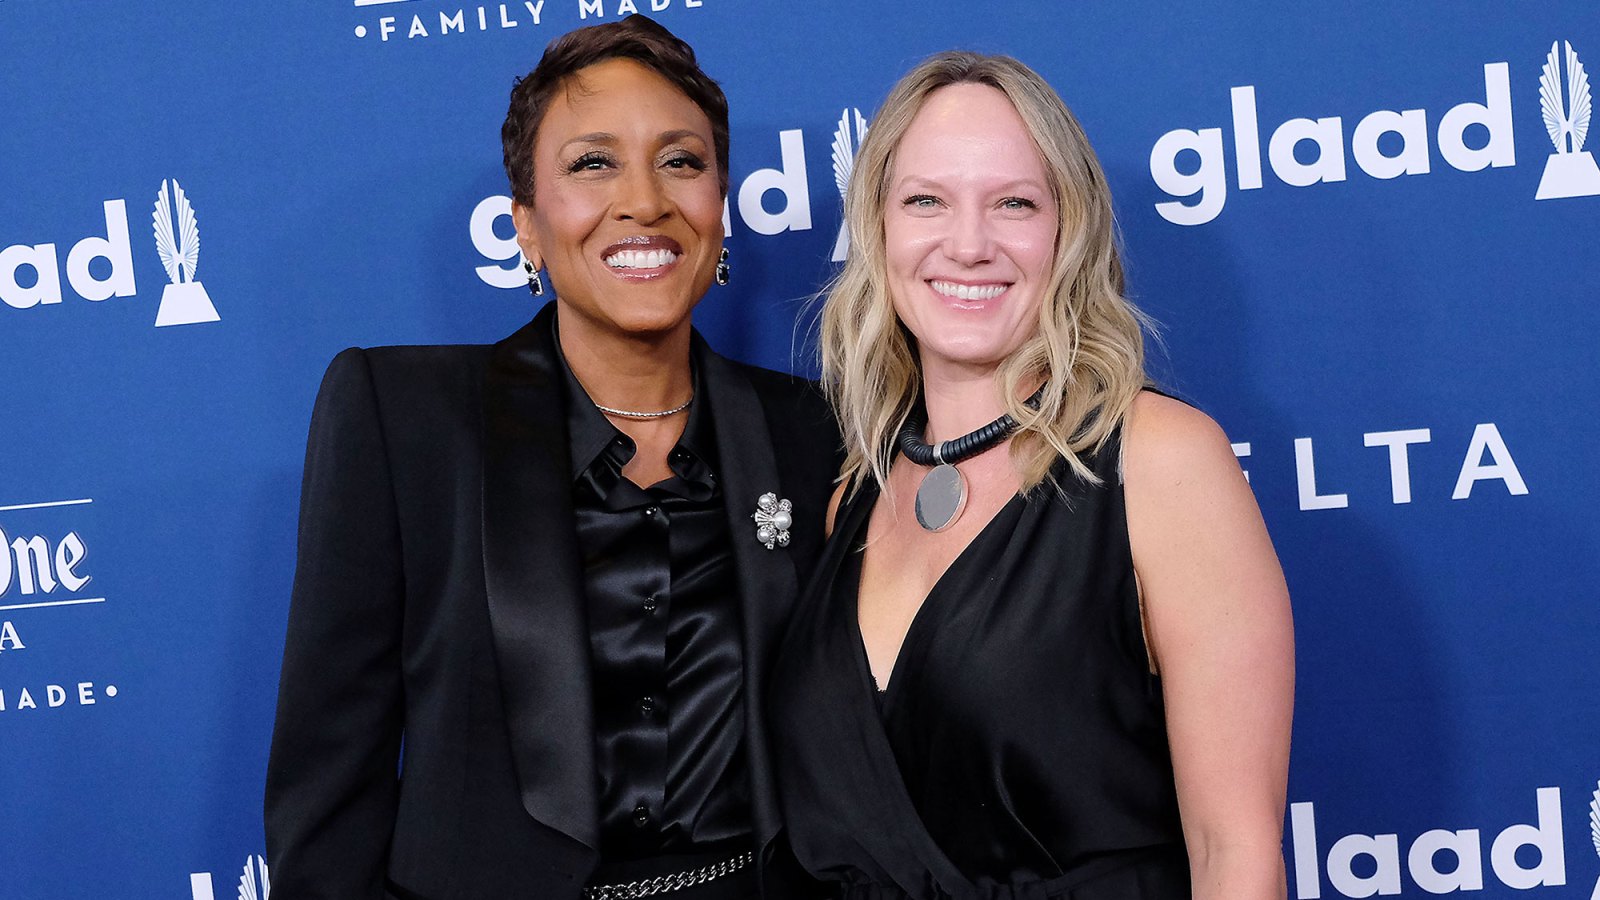 Robin Roberts Says Her Past Health Struggles Brought Her Closer With Fiancee Amber Laign